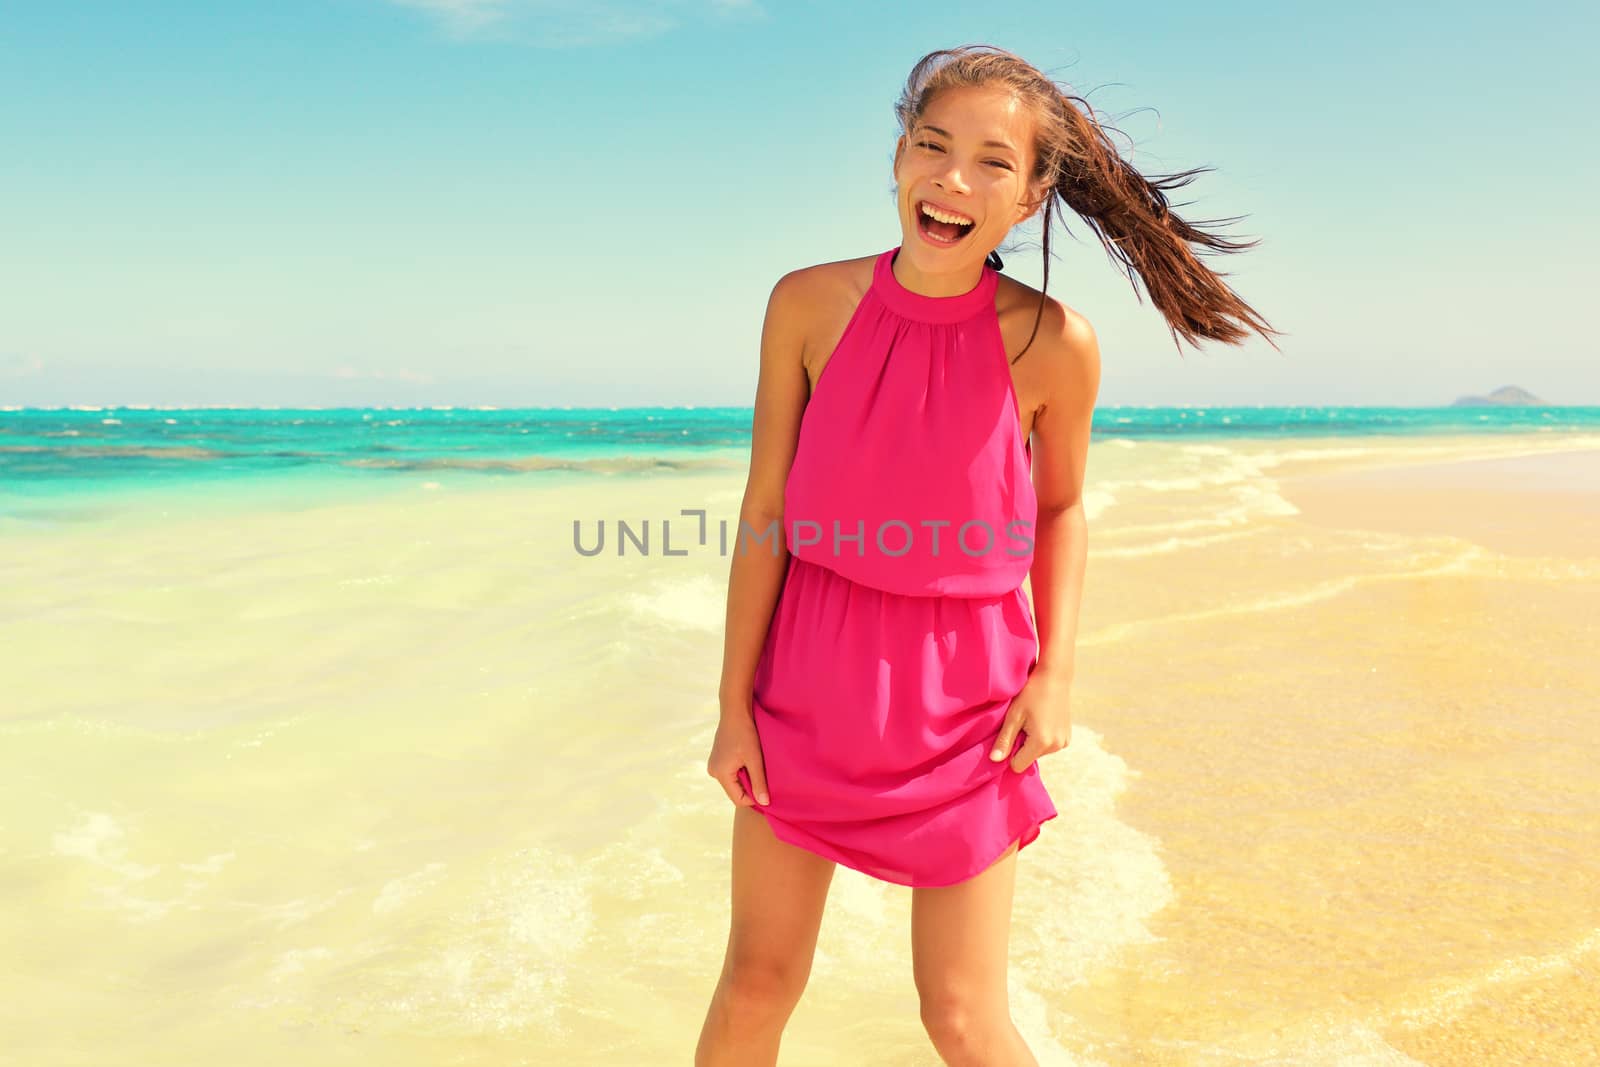 Portrait of happy young woman in pink dress standing at beach. Beautiful mixed race Asian / Caucasian female is enjoying her summer vacation. Carefree woman is laughing while standing on shore.